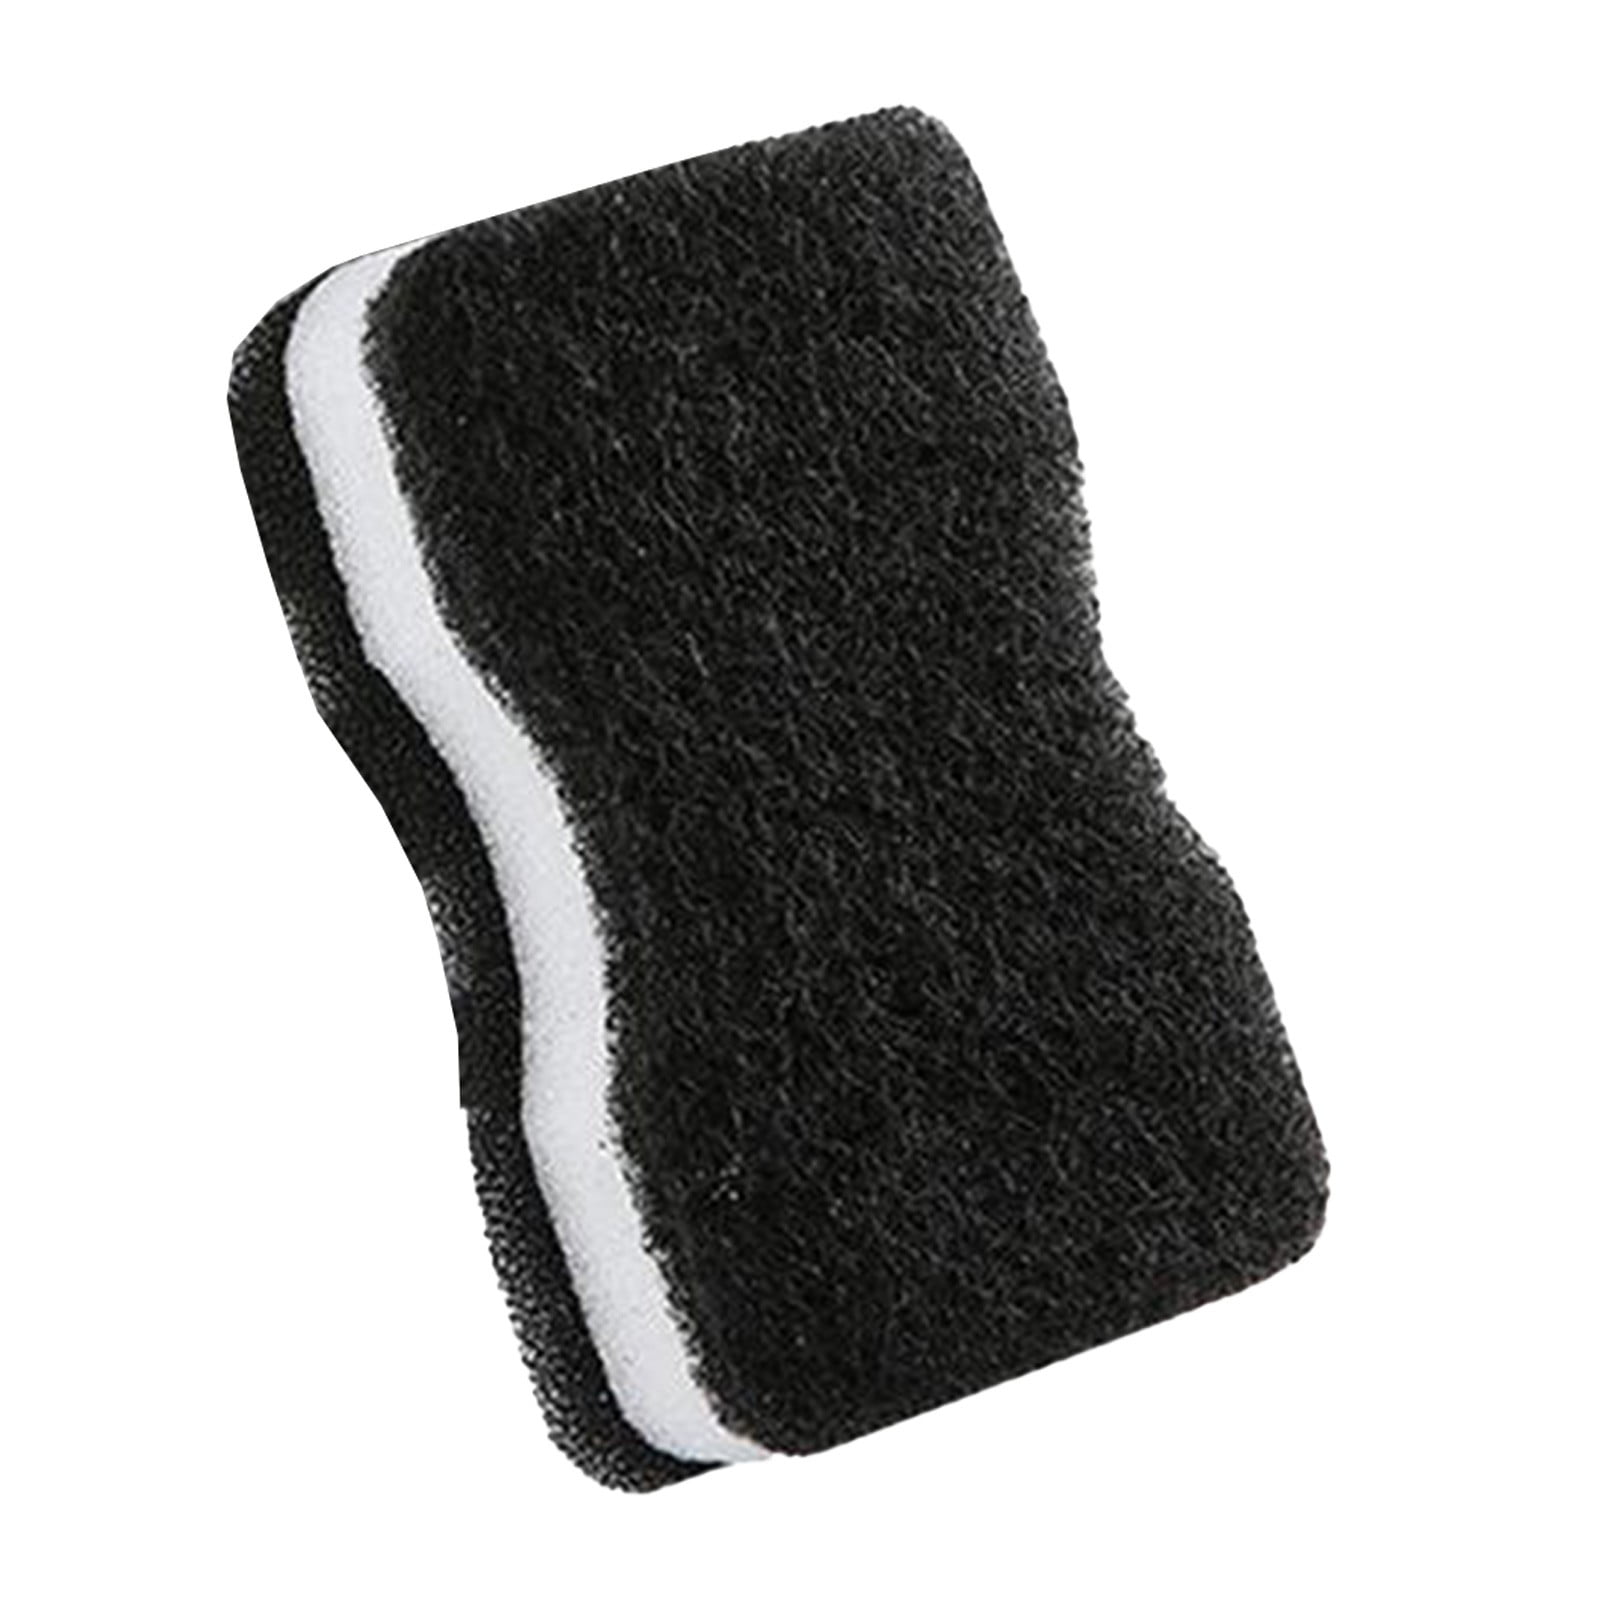 Black Kitchen Sponge for Cleaning Cookware and Gas Stove Top - 5pc - Merae